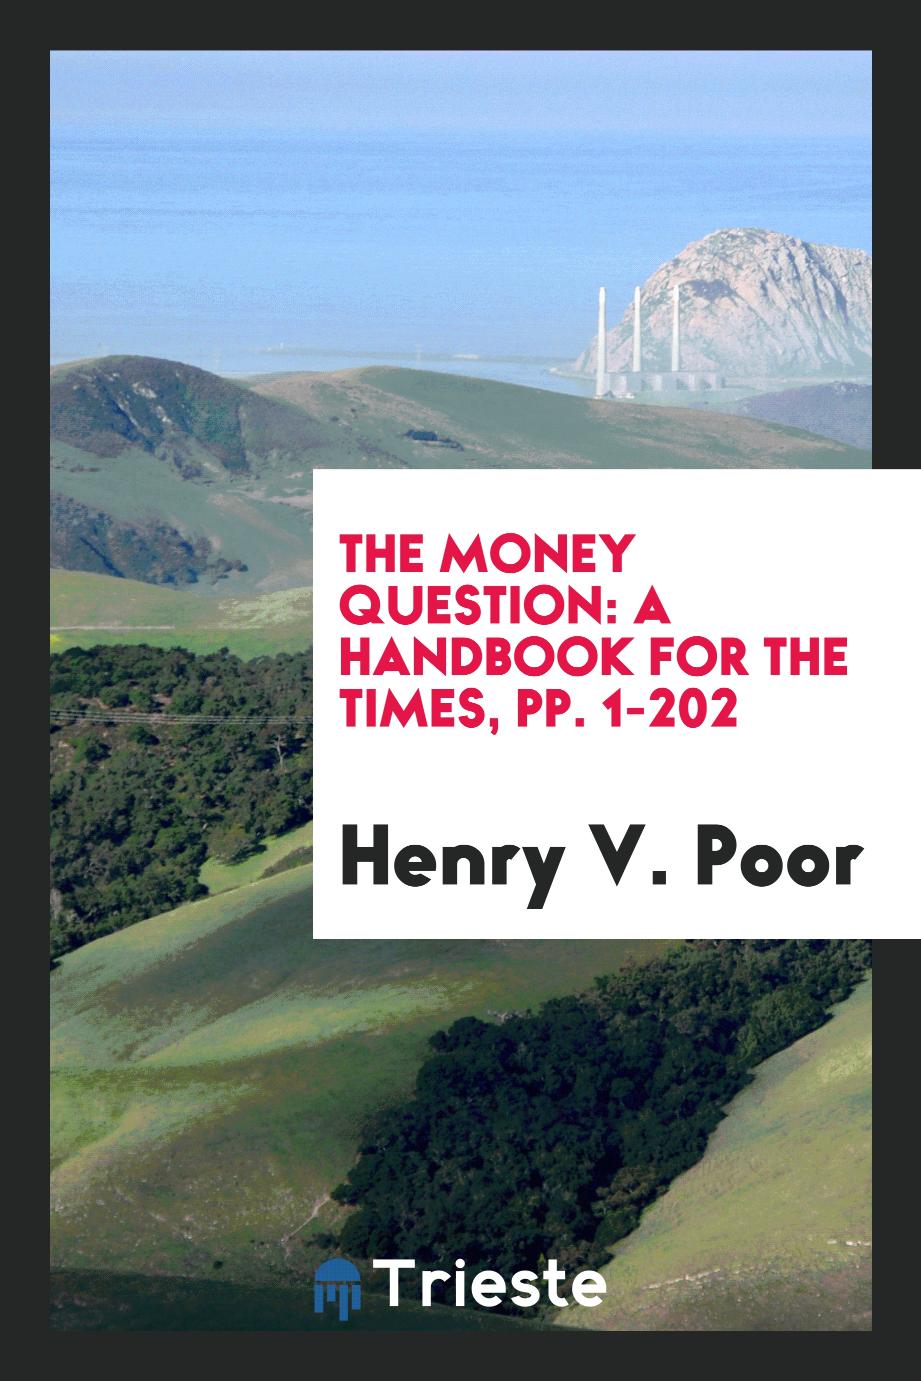 The Money Question: A Handbook for the Times, pp. 1-202